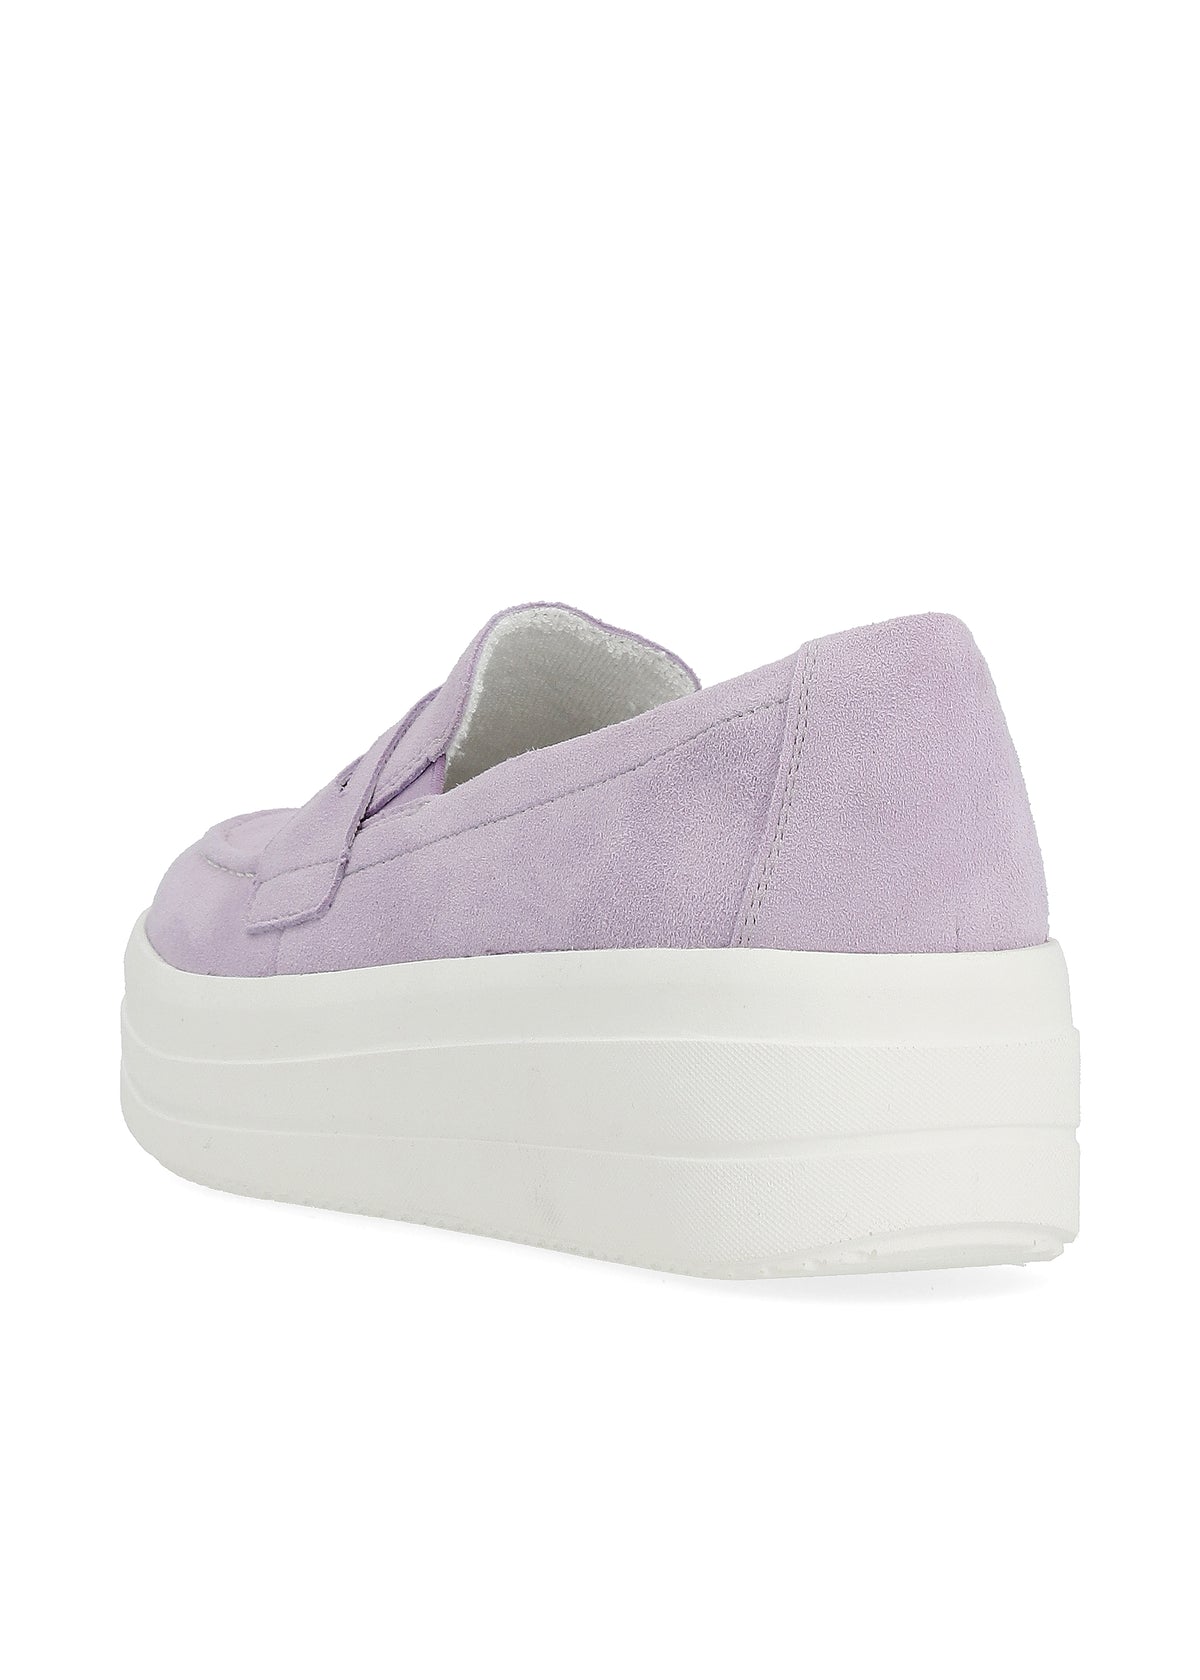 Loafers with a thick sole - light purple